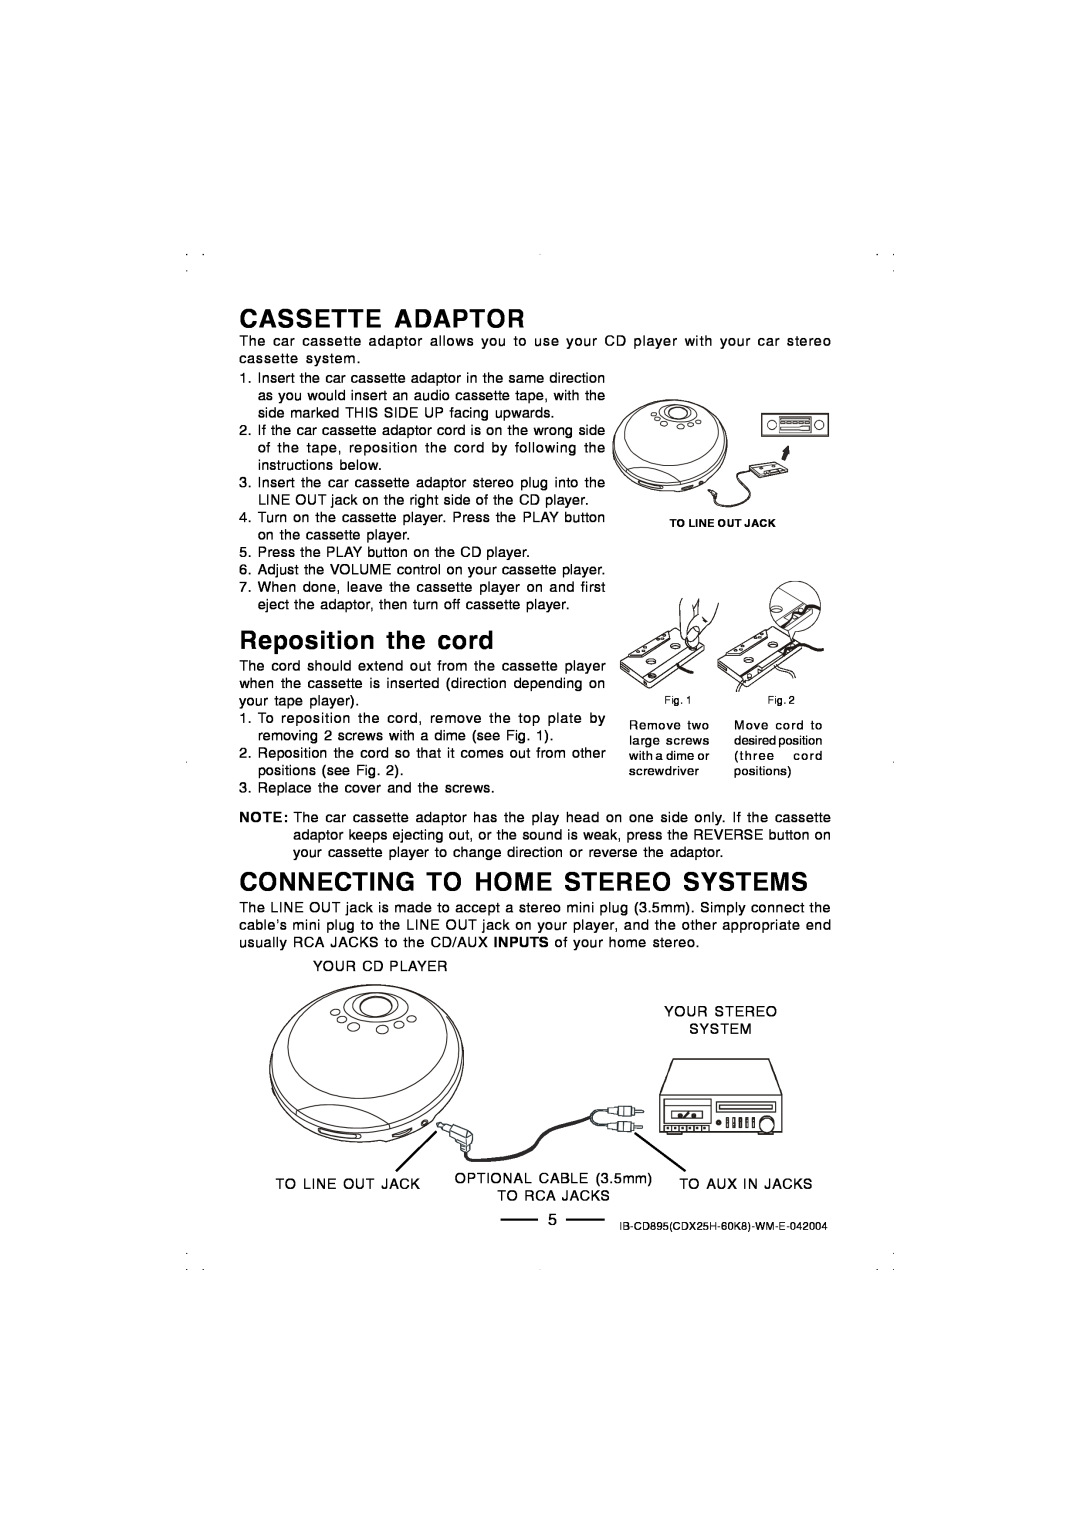 Lenoxx Electronics CD-895 manual Cassette Adaptor, Reposition the cord, Connecting To Home Stereo Systems 